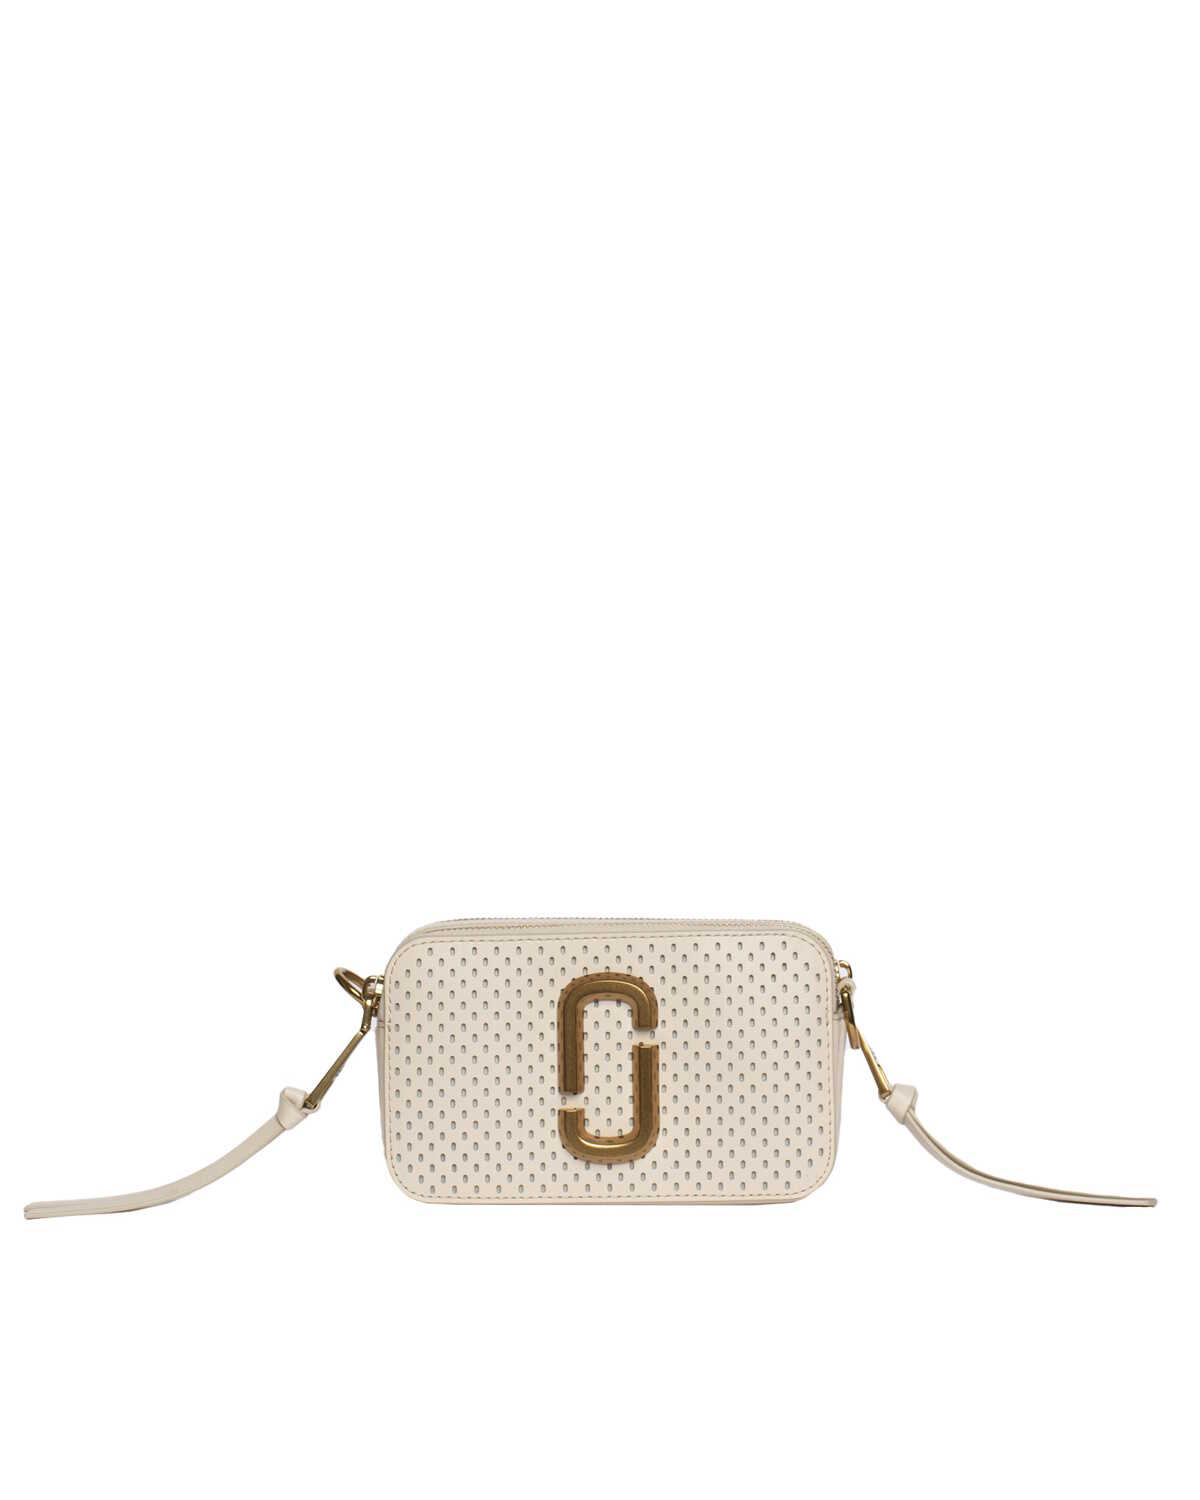 Marc Jacobs Perforated Snapshot BEIGE